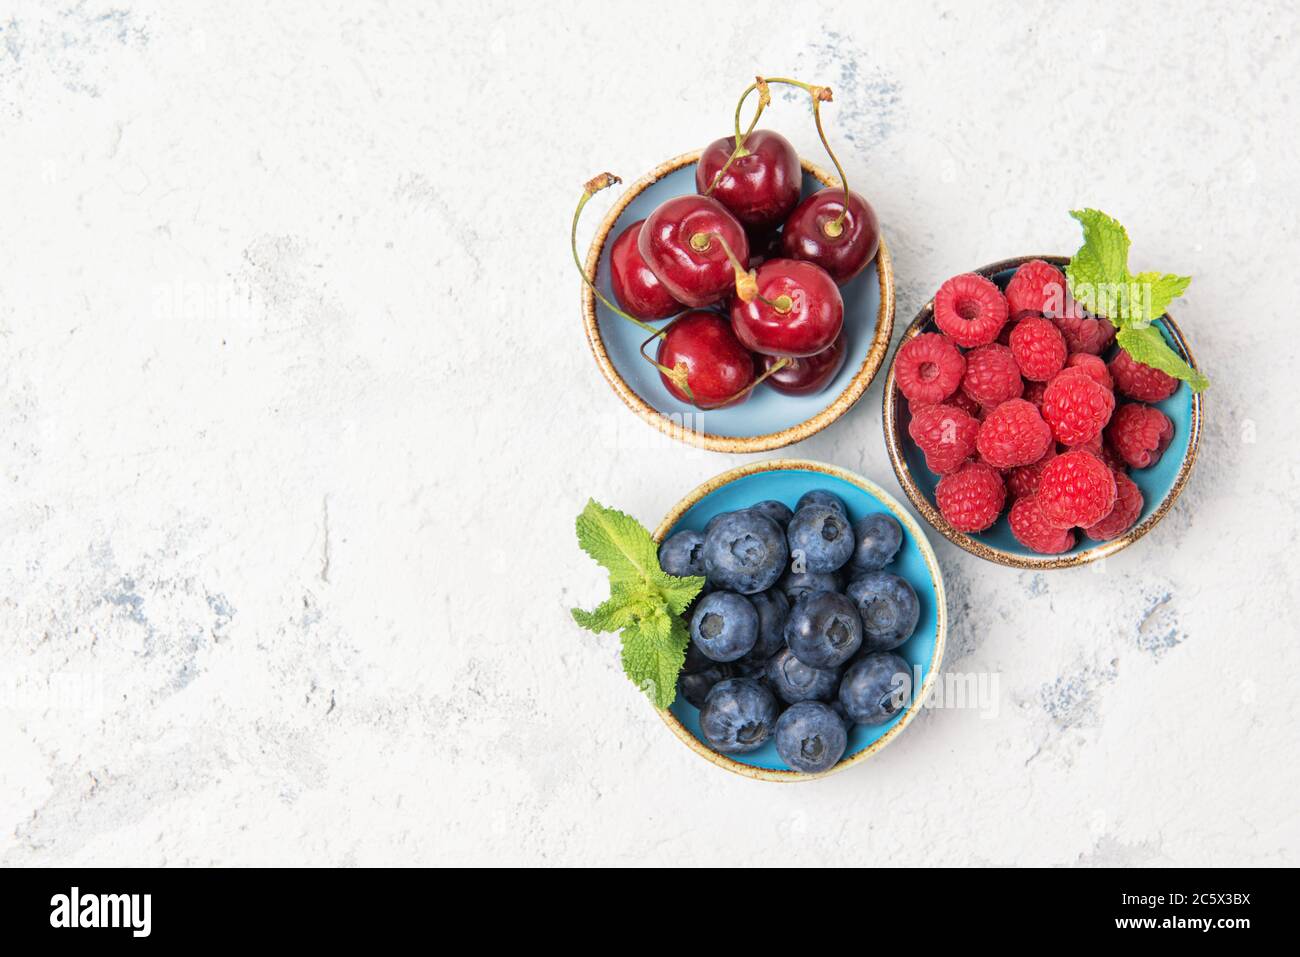 Assorted fresh juicy berries. Cherry, blueberry and raspberry in bowls, top view Stock Photo